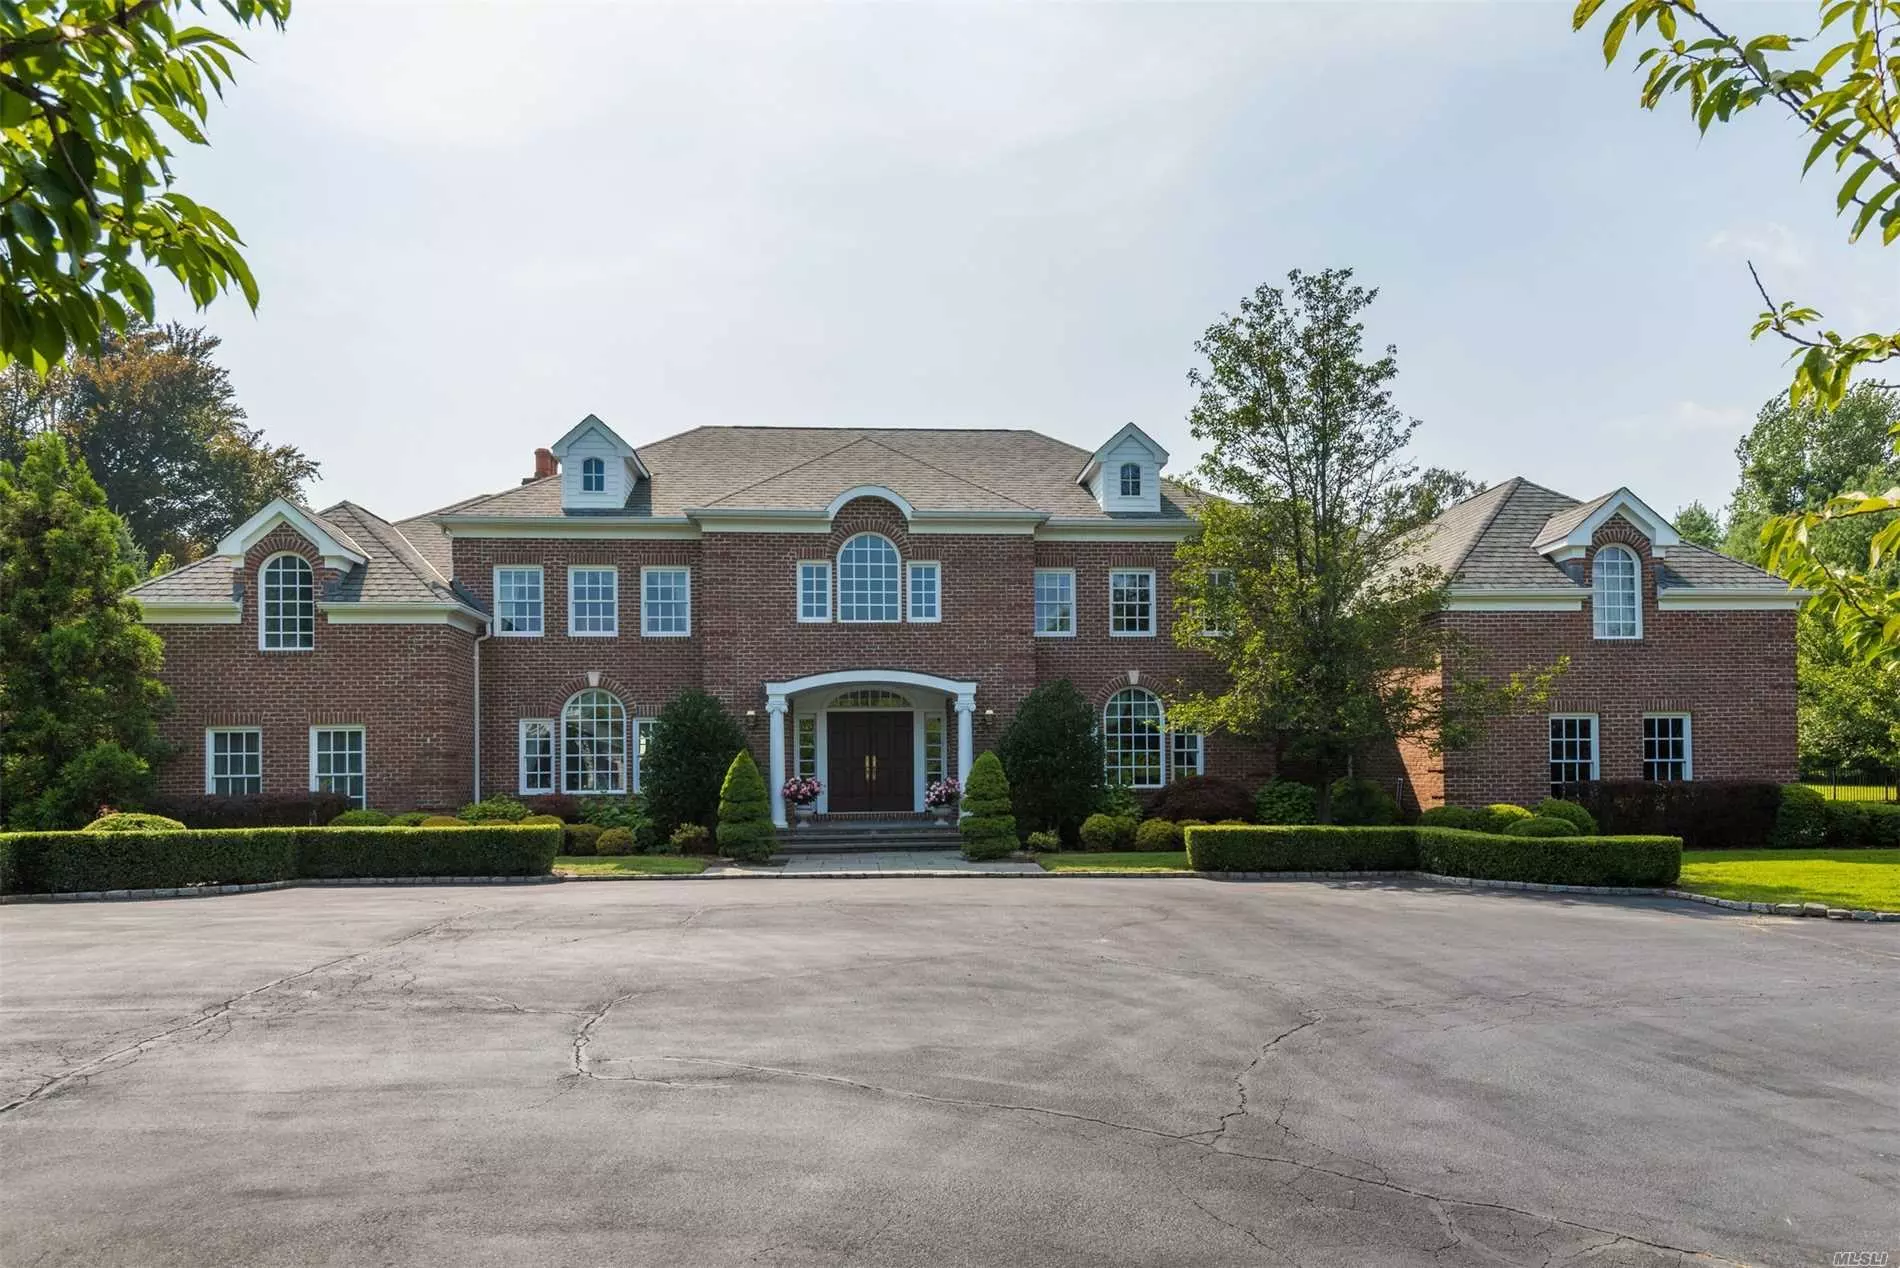 Fabulous 7000 Sq Ft Brick Colonial On One Of The Most Desirable Streets In Old Westbury. Built In 2004 On Over 4 Beautiful Acres With A Heated Ig Pool.